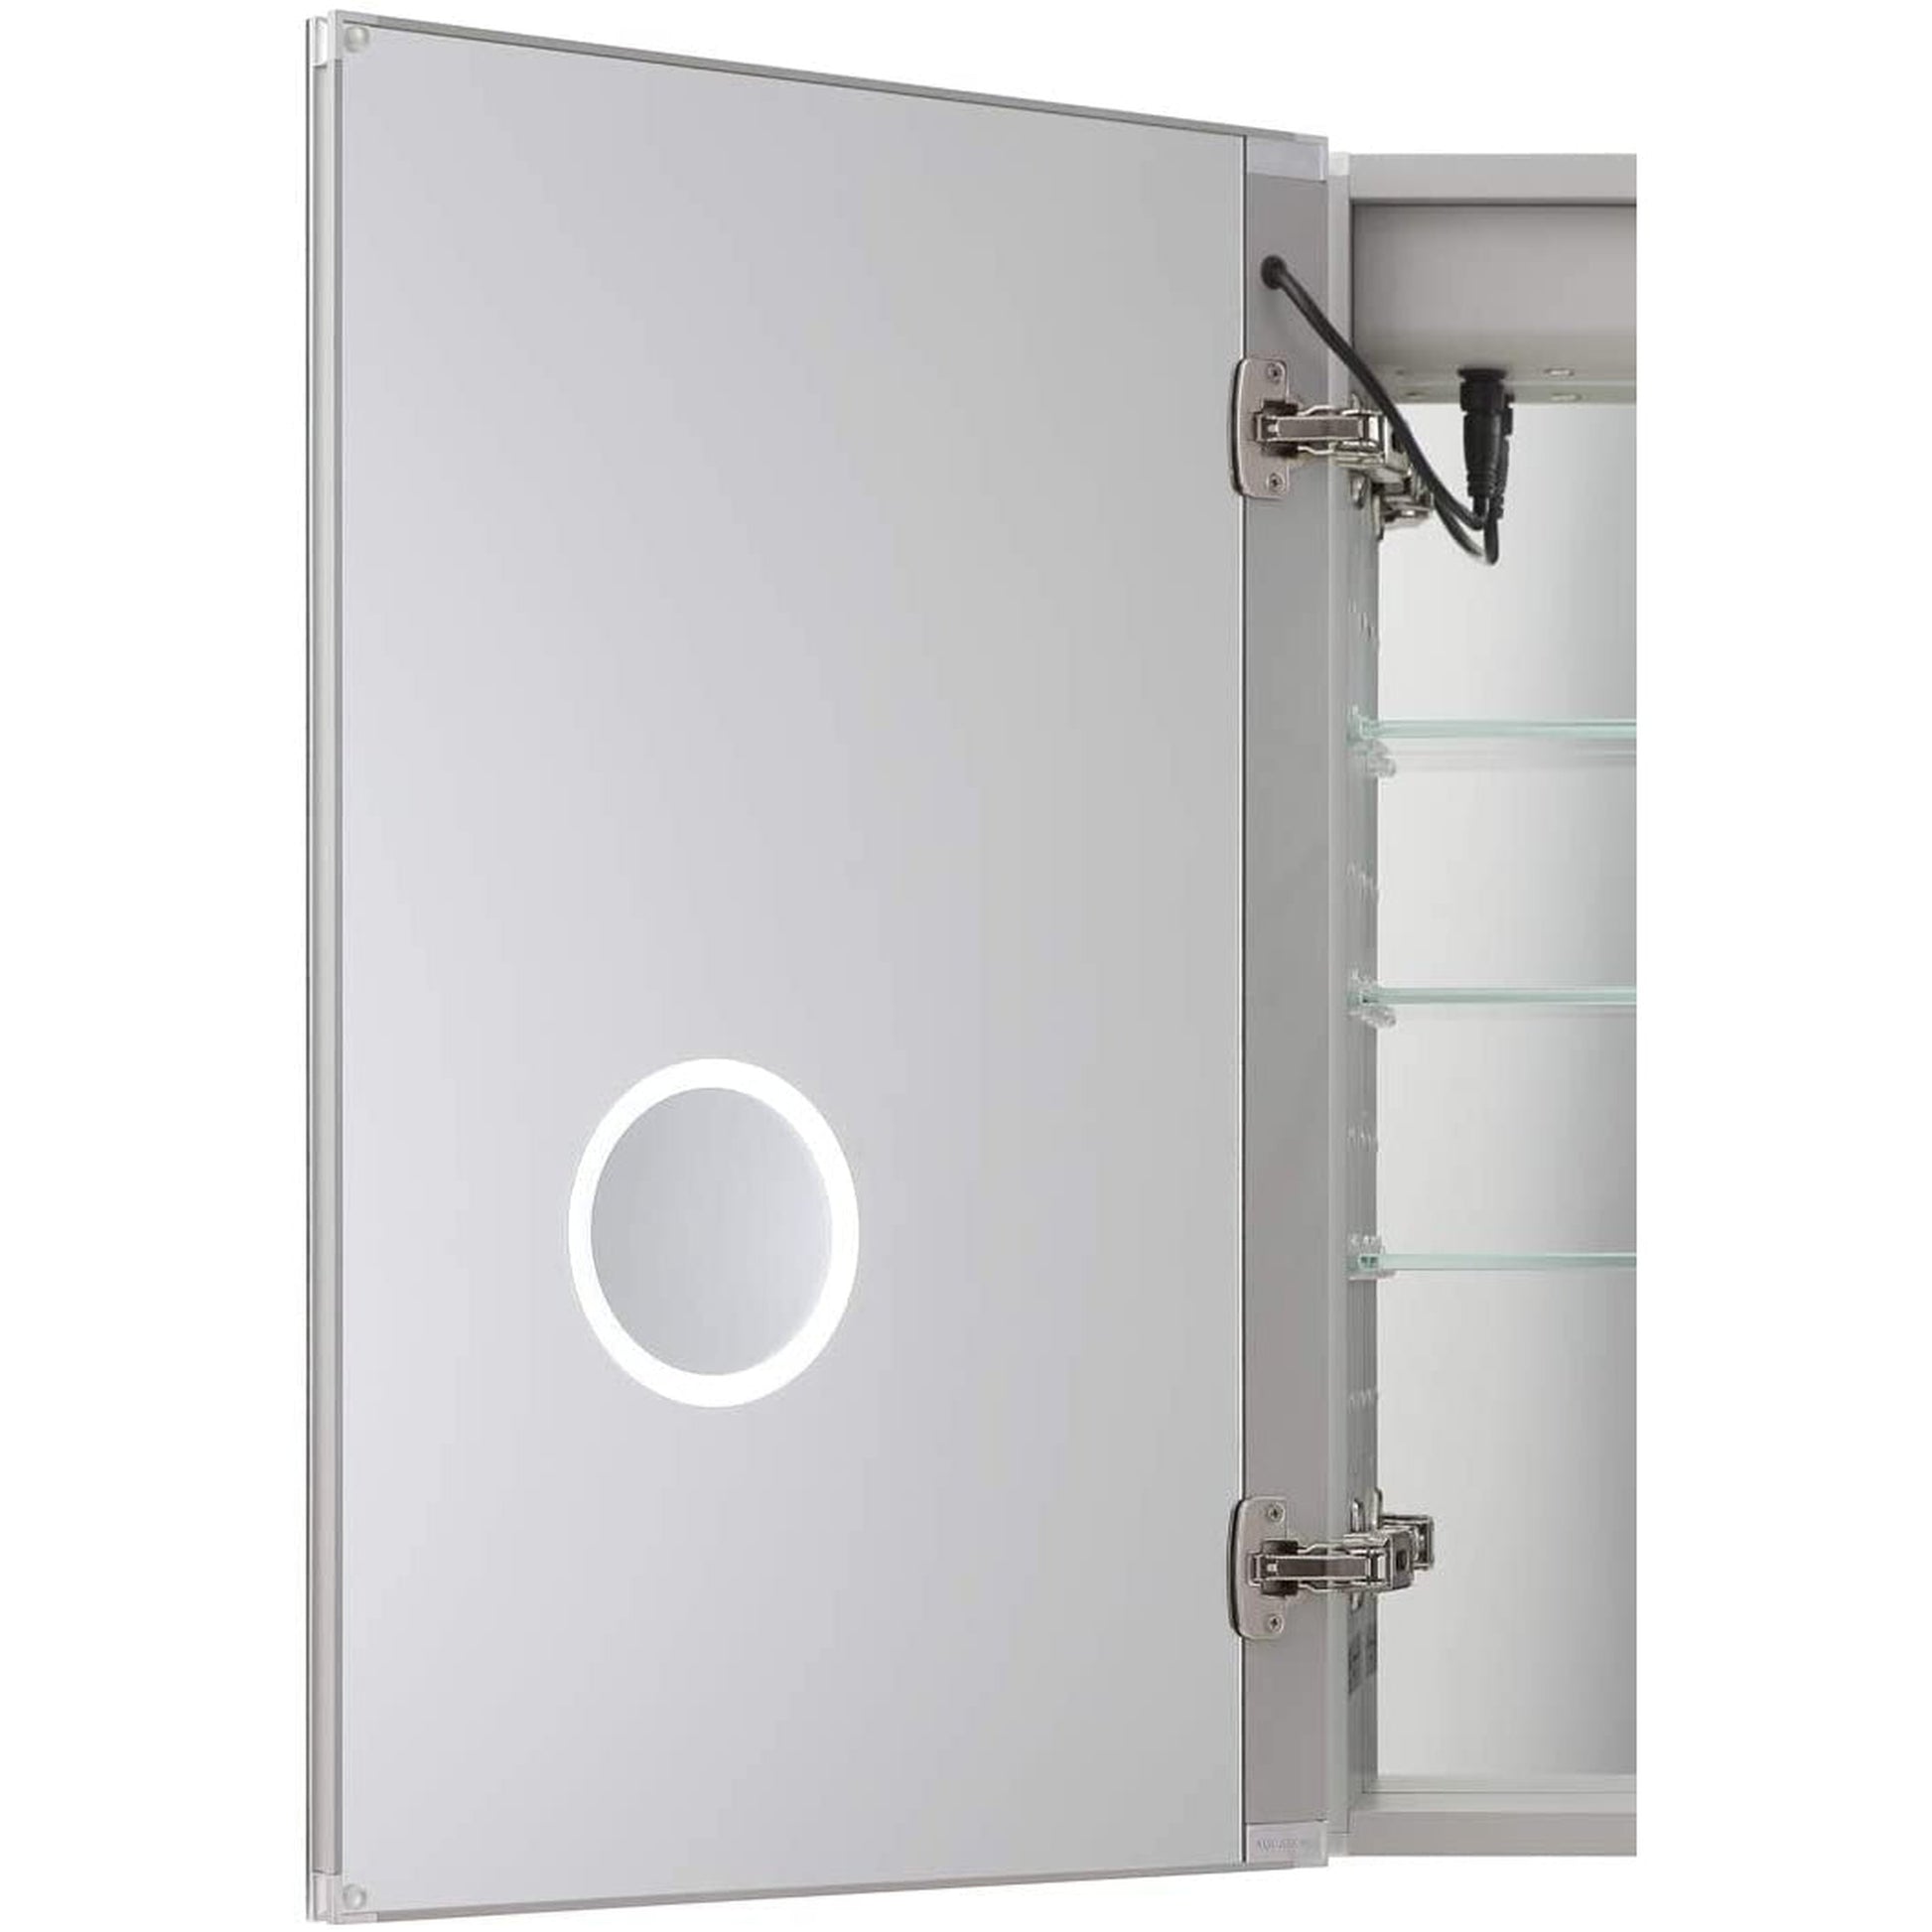 Aquadom Signature Royale Bi-View 36" x 40" Rectangular Medicine Cabinet With Lighting, Defogger, Integrated LED 3X Magnifying Mirror And Electrical Outlet with USB